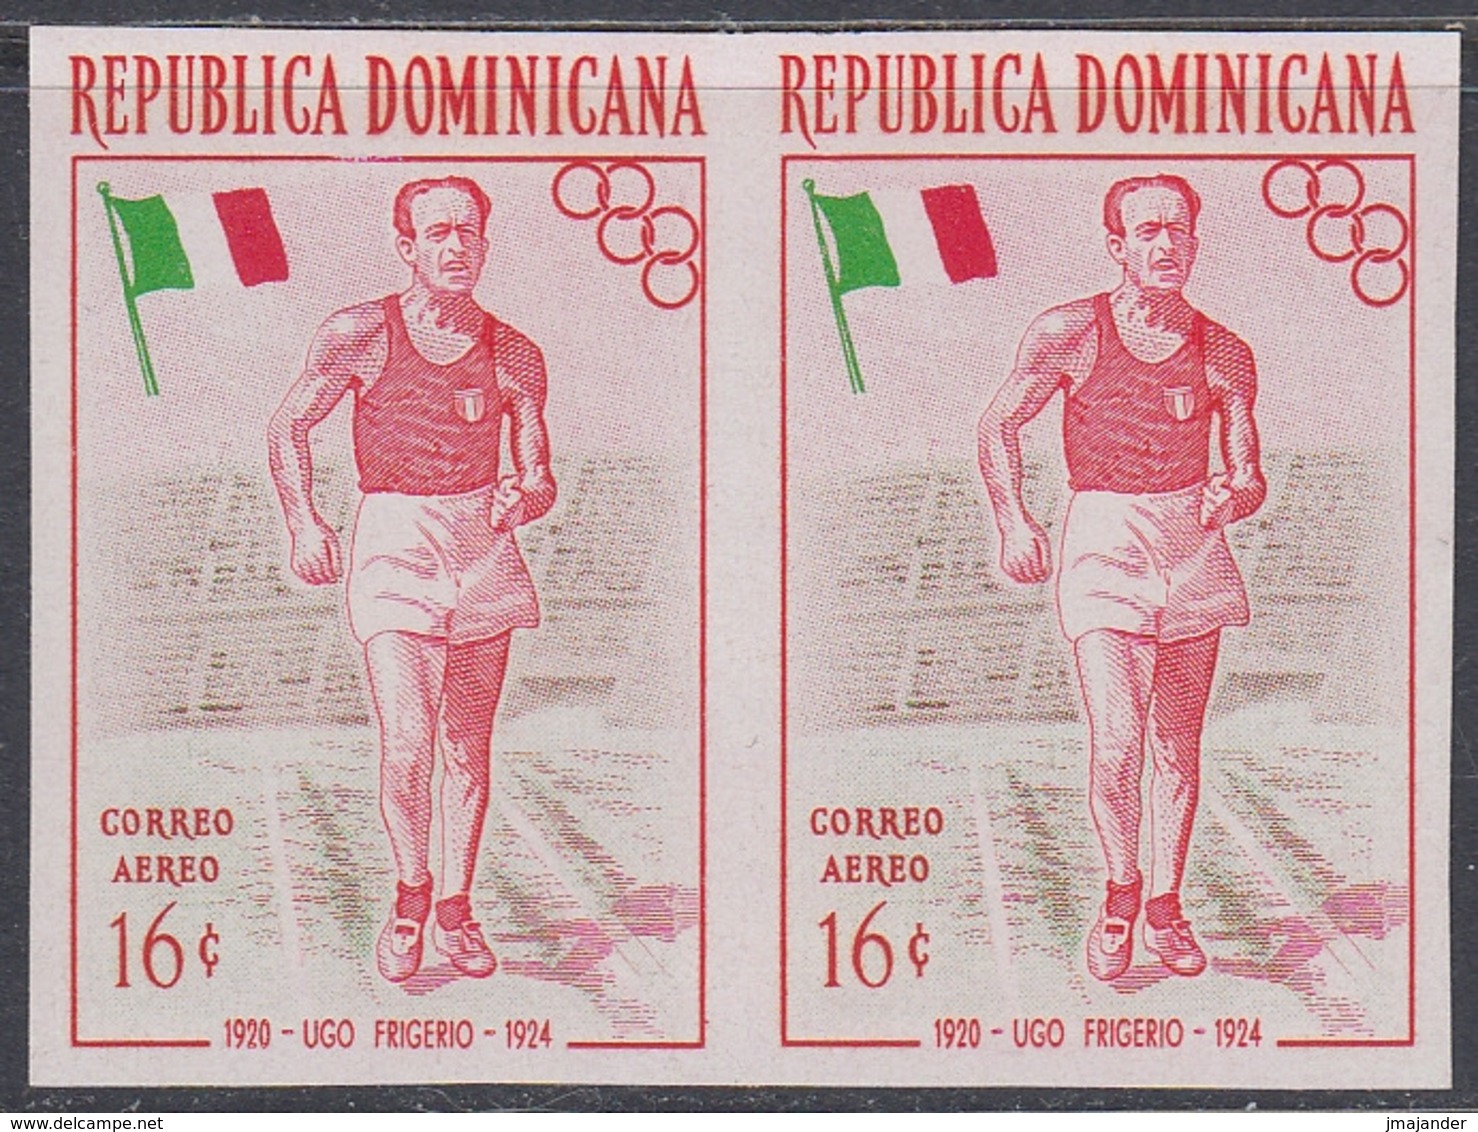 Dominican Republic 1957 - Olympic Games In Melbourne: Frigerio, Race Walking, Athletics - Imperforate Pair Mi 566 ** MNH - Summer 1956: Melbourne